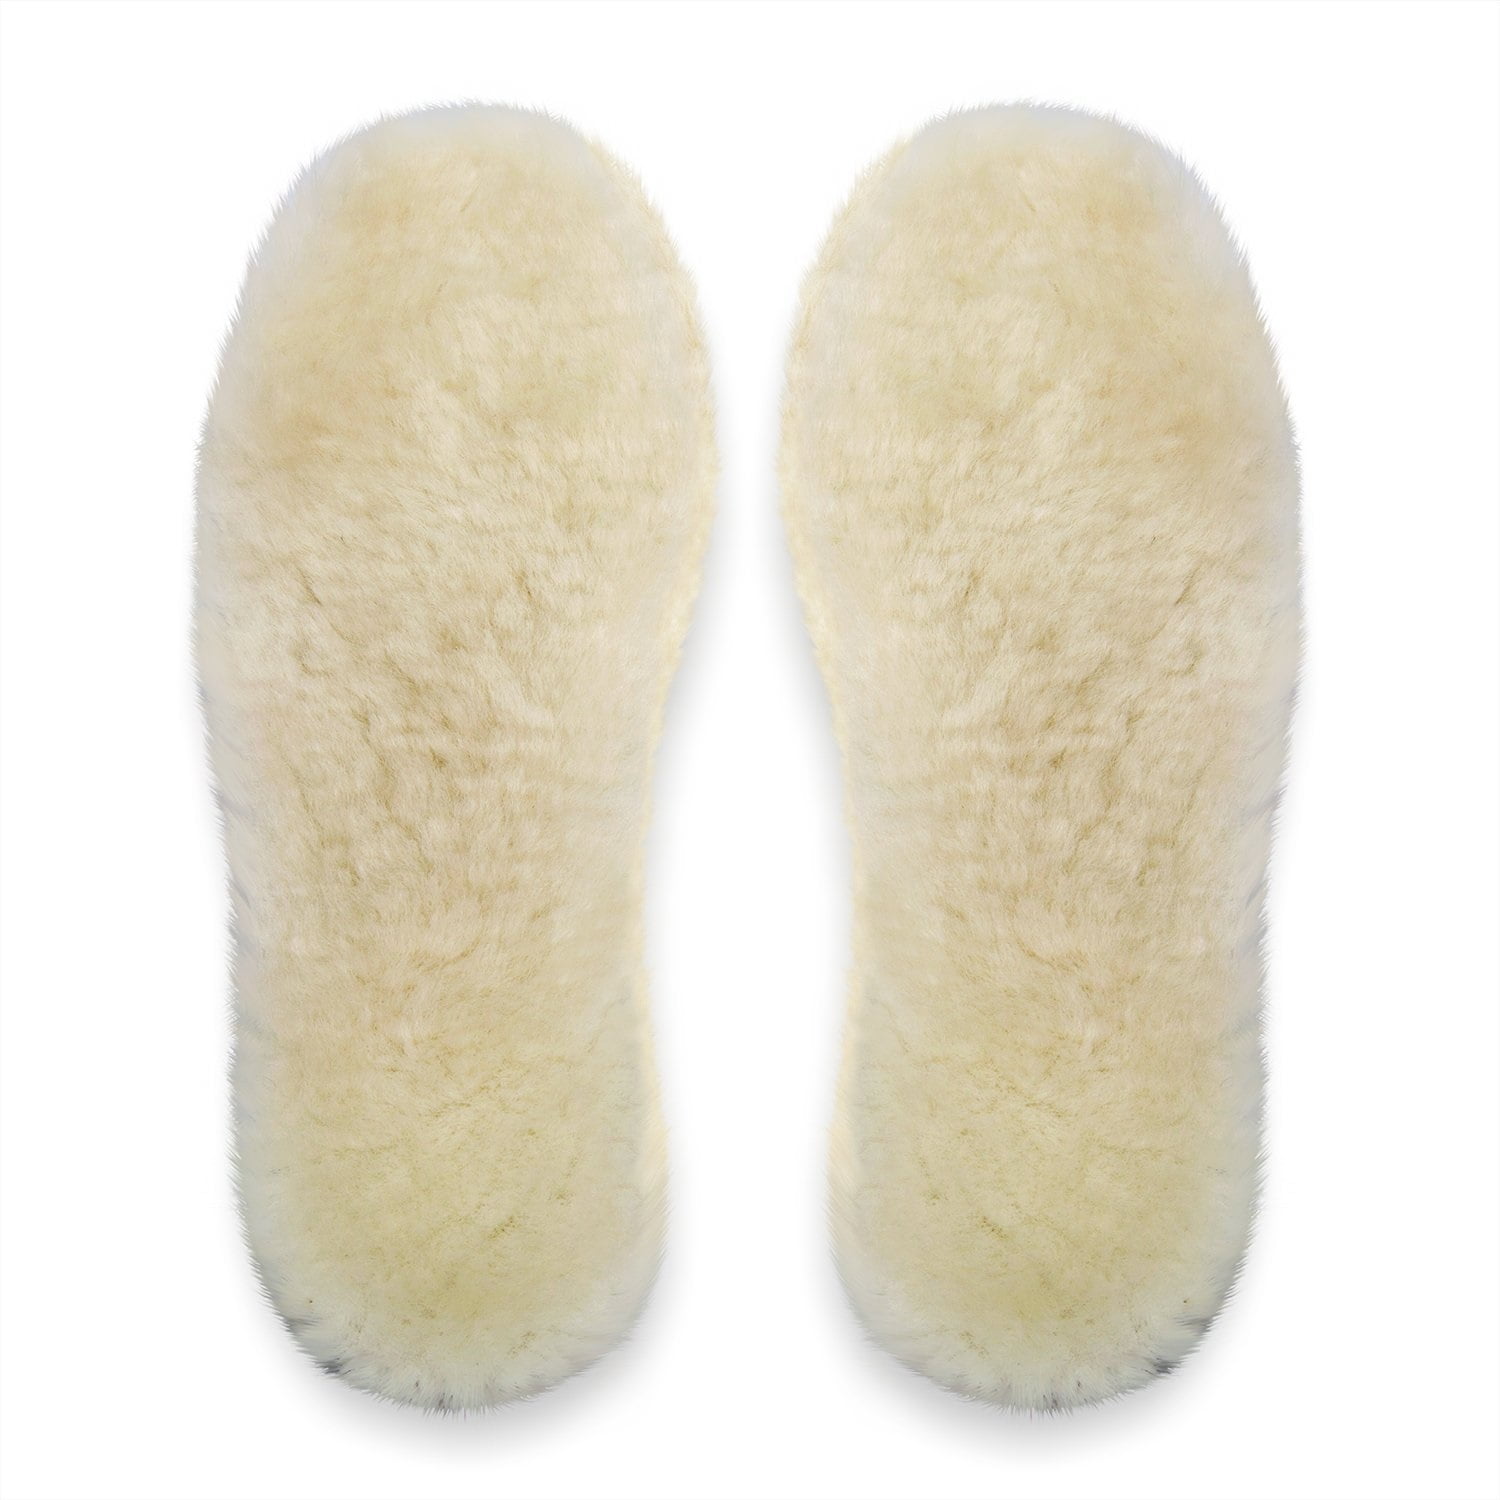 100% Lambs Wool from Sheepskin 2x Pairs of Lambswool Insoles Ladies/Mens 